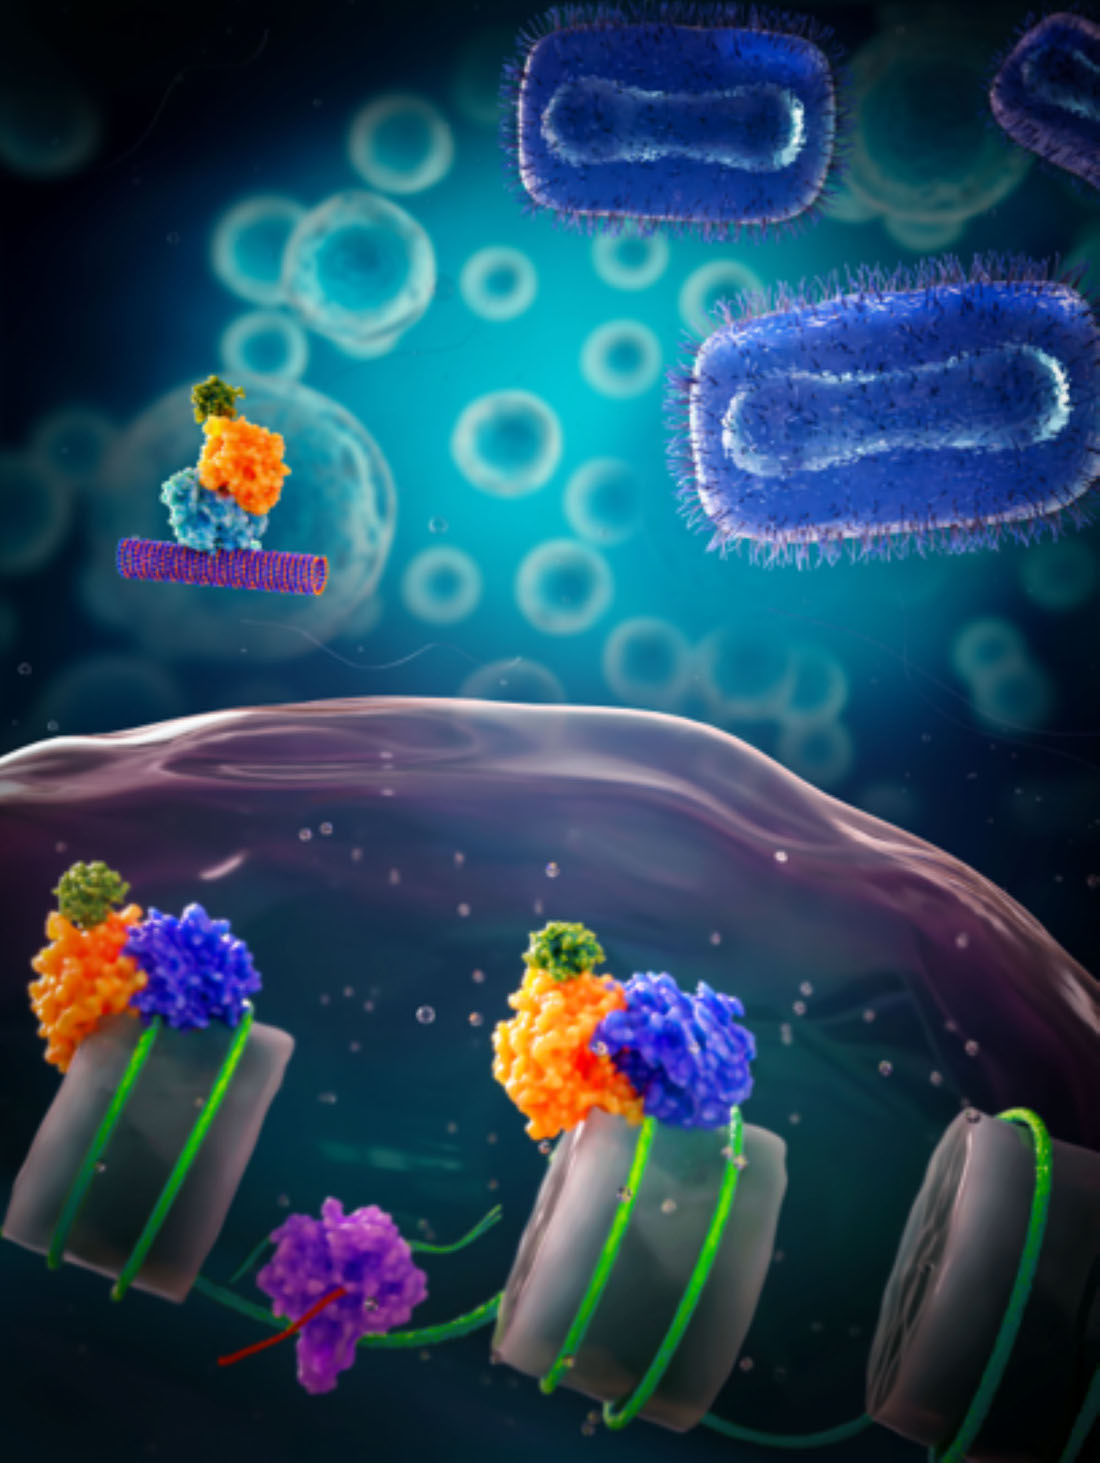 A rendering illustrates the FEAR antiviral immune pathway